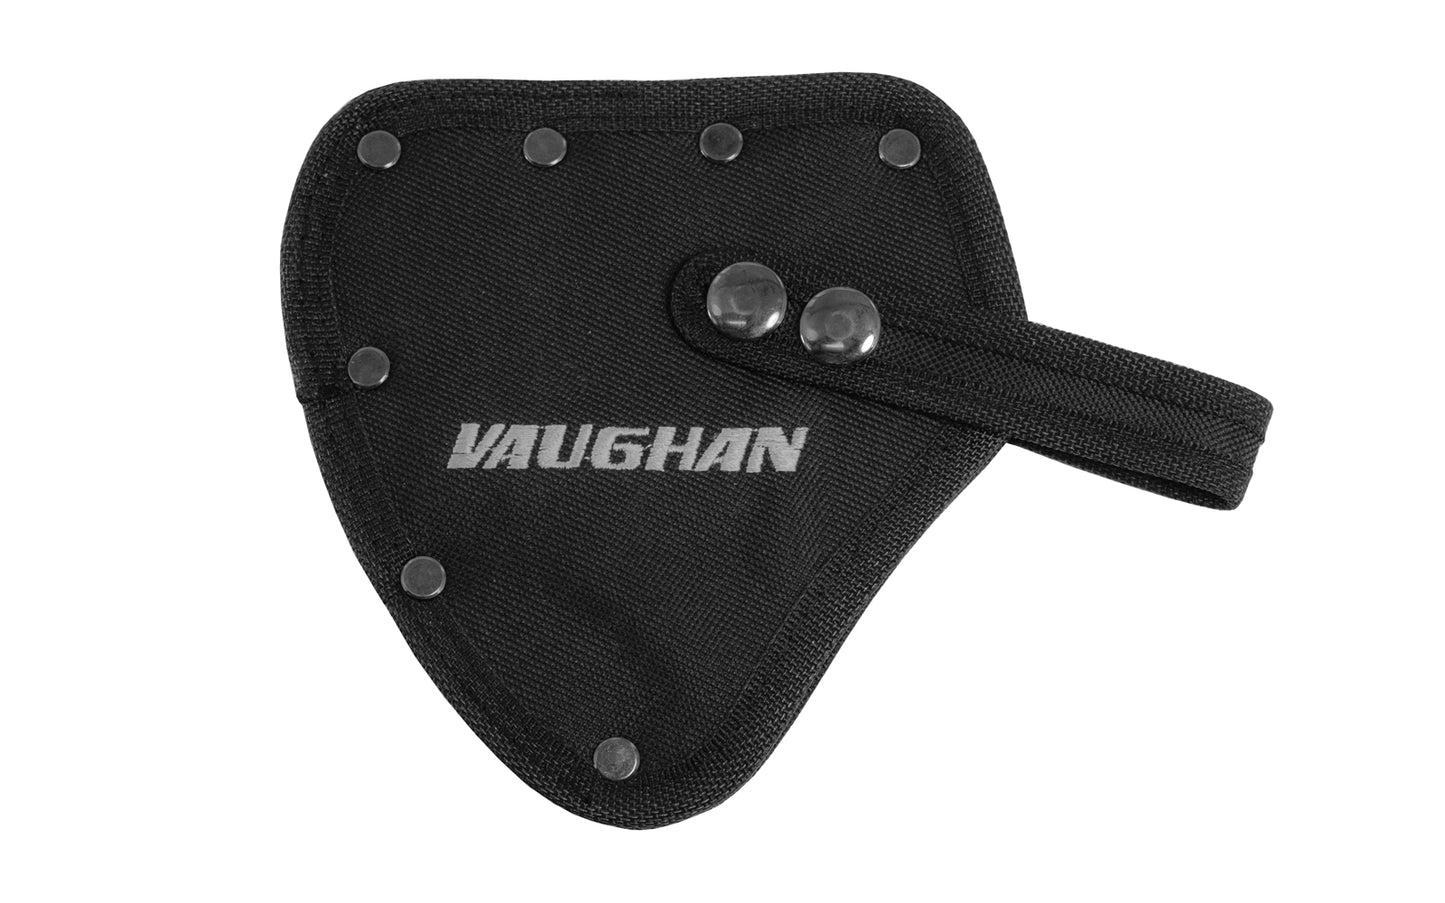 Vaughan Sheath. S1-1/4 Nylon Sheath designed for Vaughan models AS1-1/4, SC1-1/4 and AS2. Sheath for 1-1/4 LB Camp Hatchet.  Vaughan & Bushnell Mfg. No. 56200.